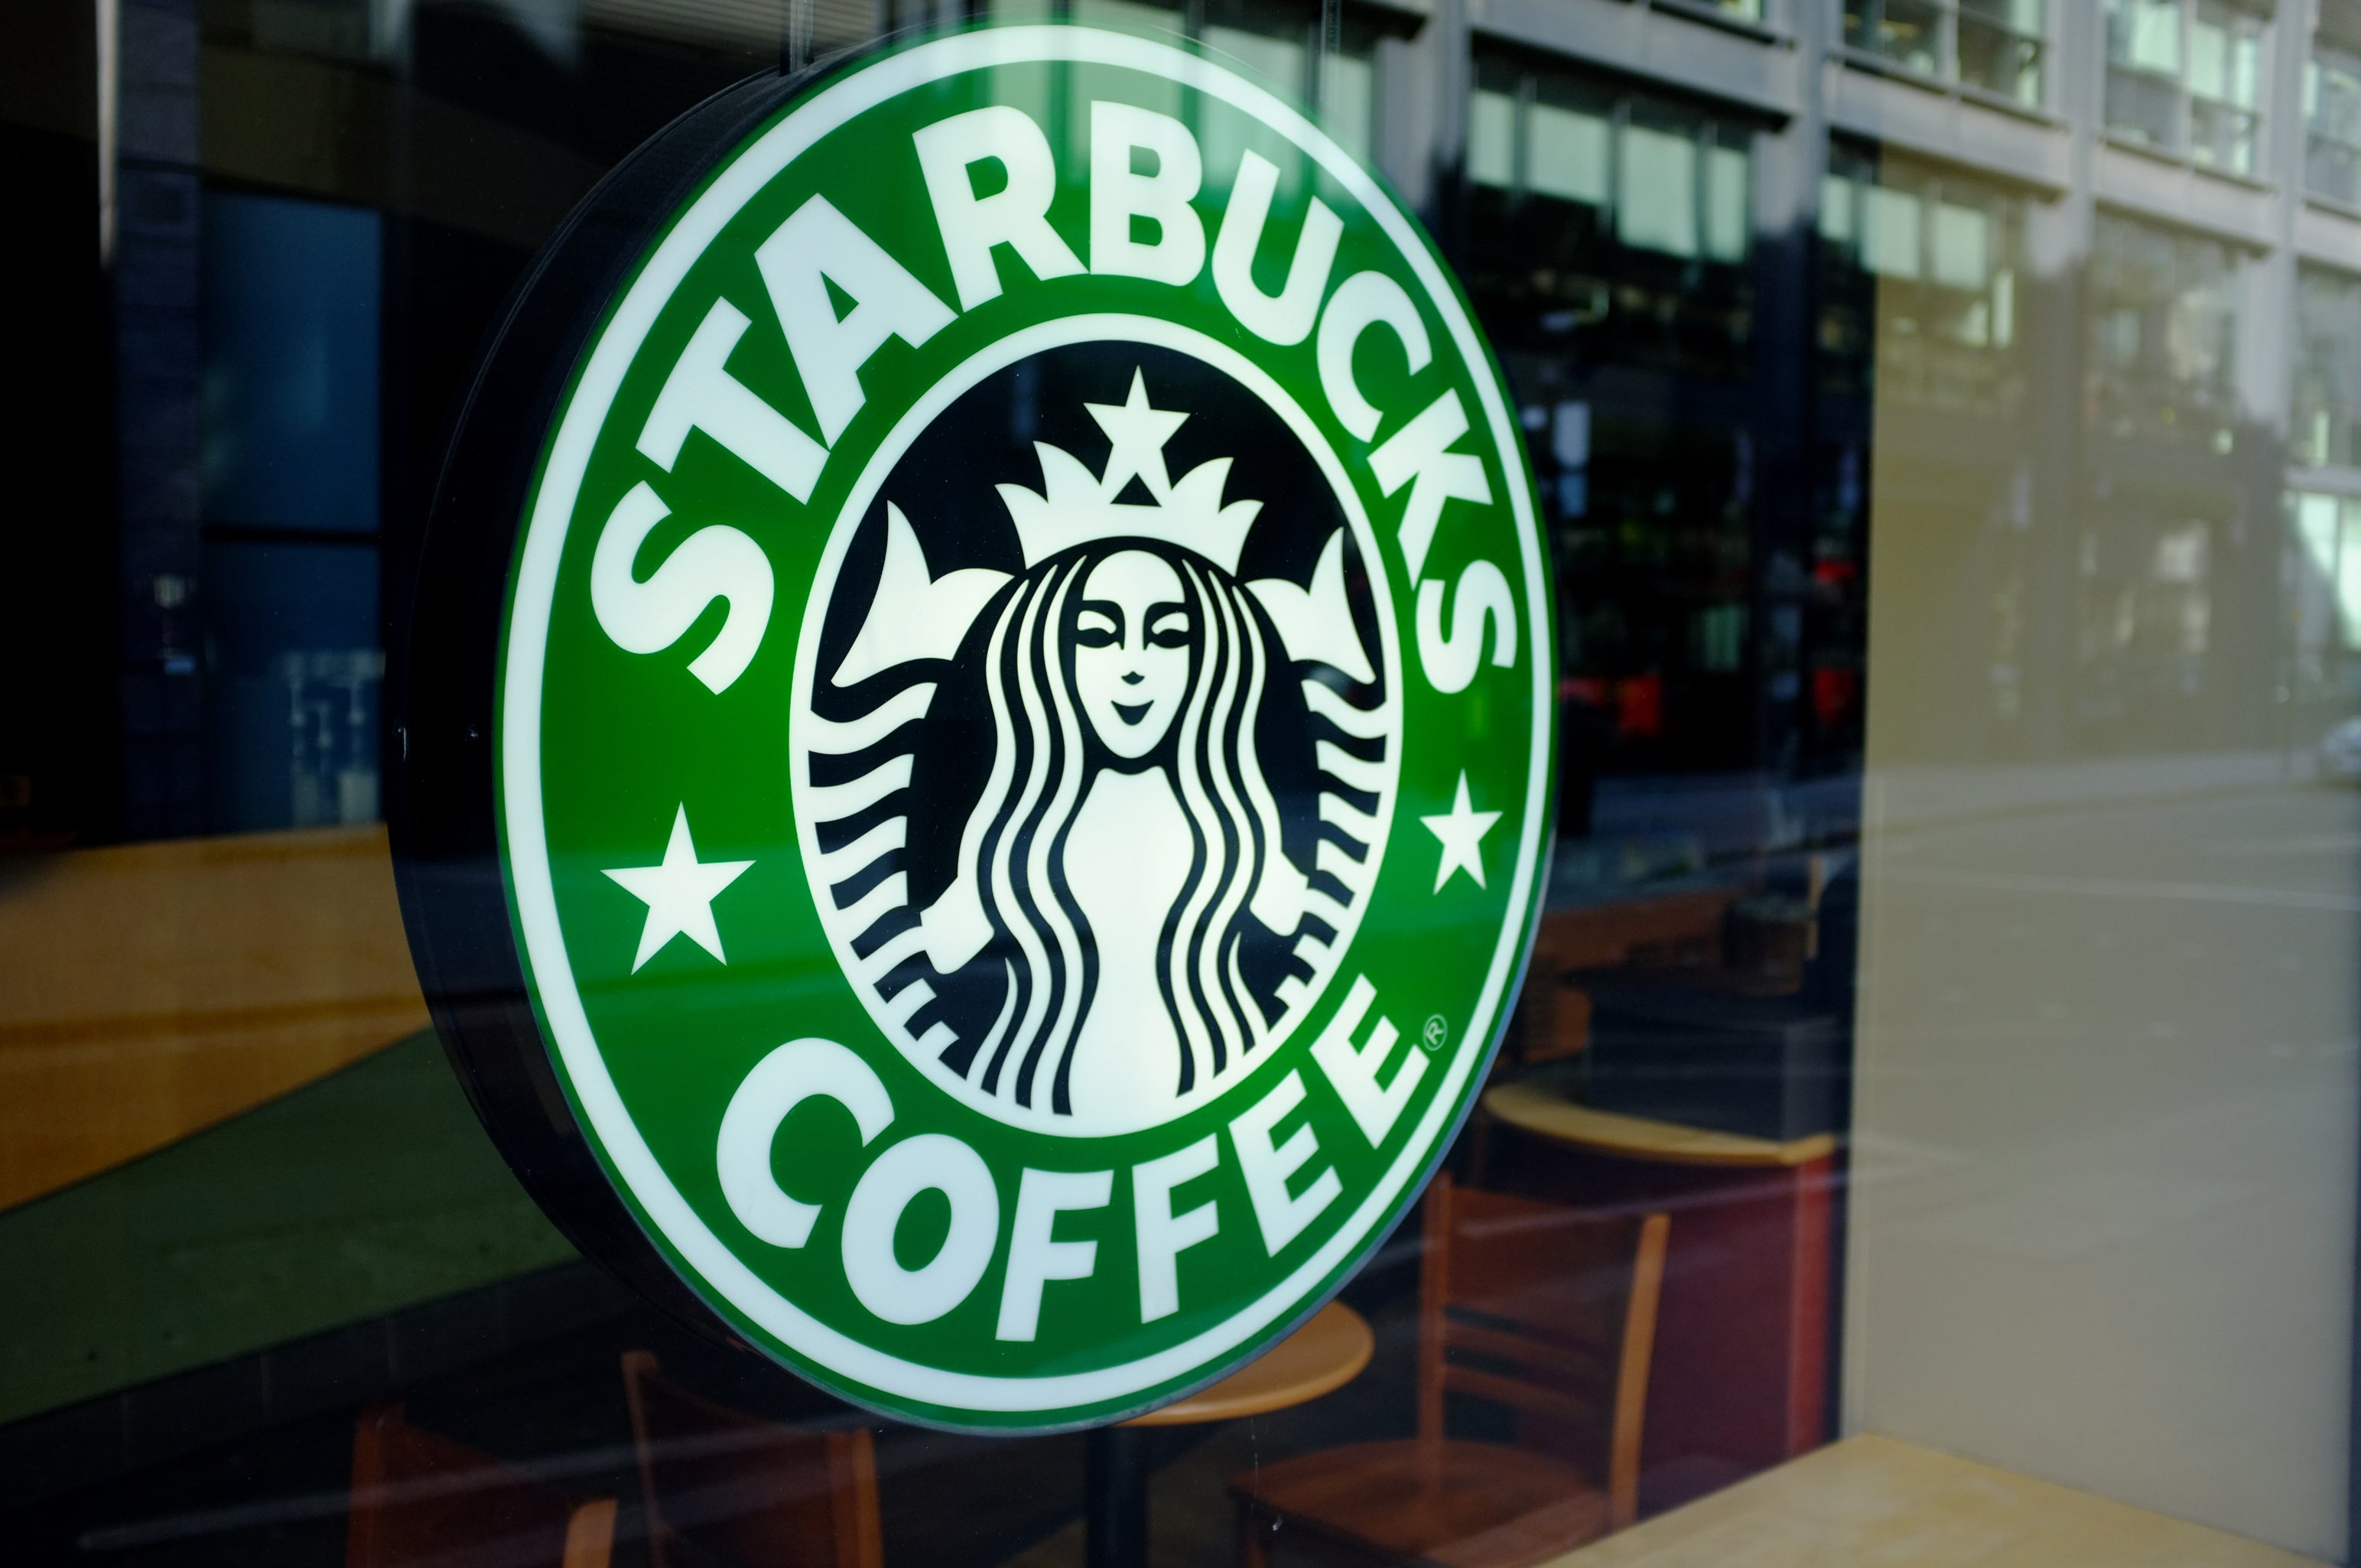 Starbucks says its staff were ‘really upset to hear about the customer’s loss’